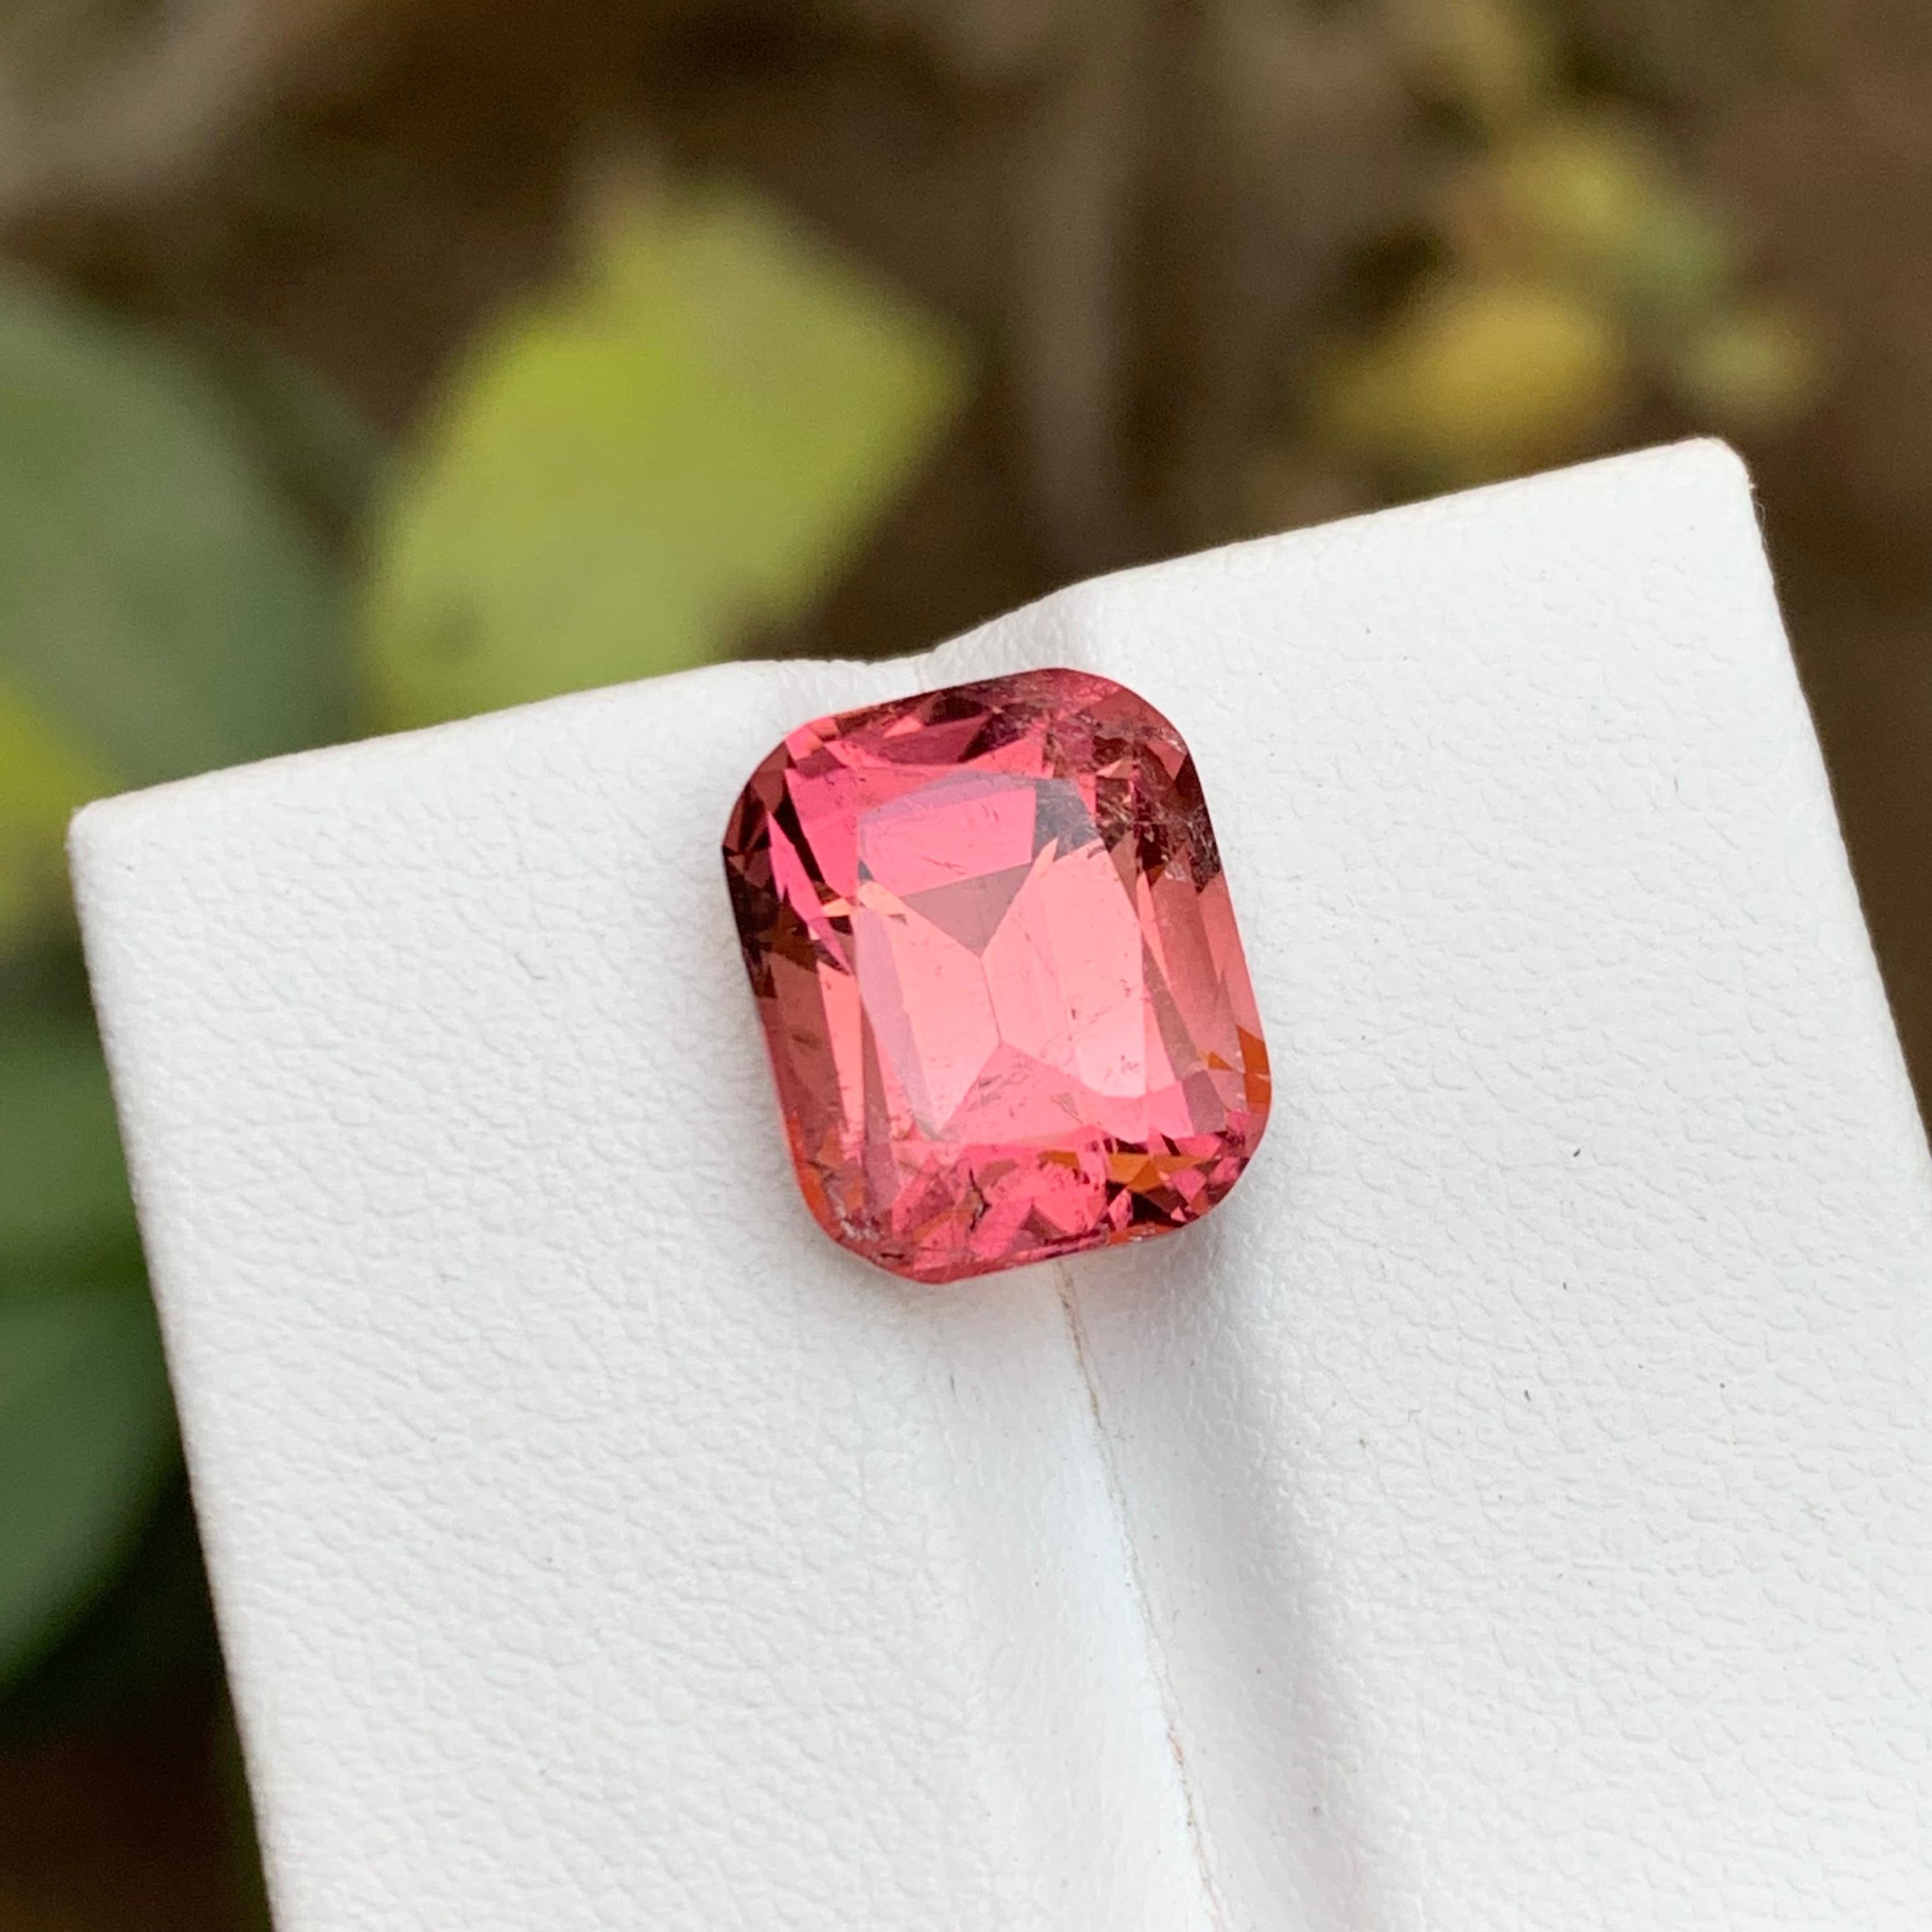 Rare Peachy Pink Natural Tourmaline Gemstone, 7.25 Ct Cushion for Ring/Pendant For Sale 4